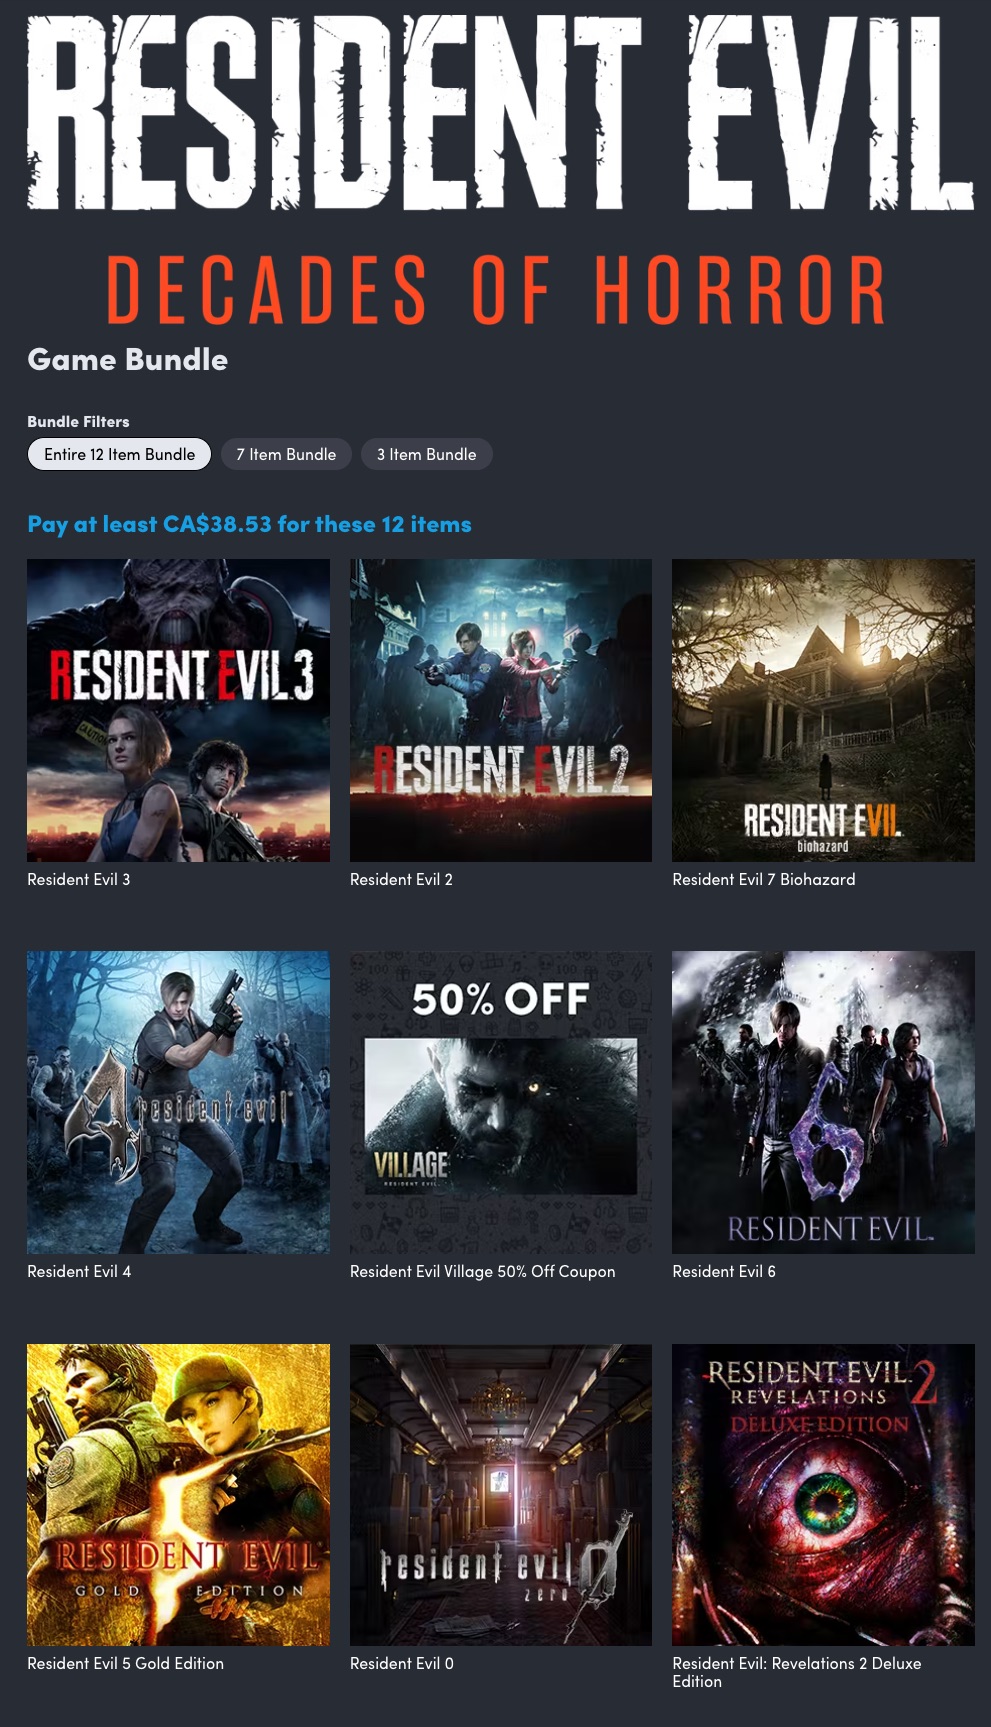 Resident Evil: Decades of Horror Humble Bundle Now Available